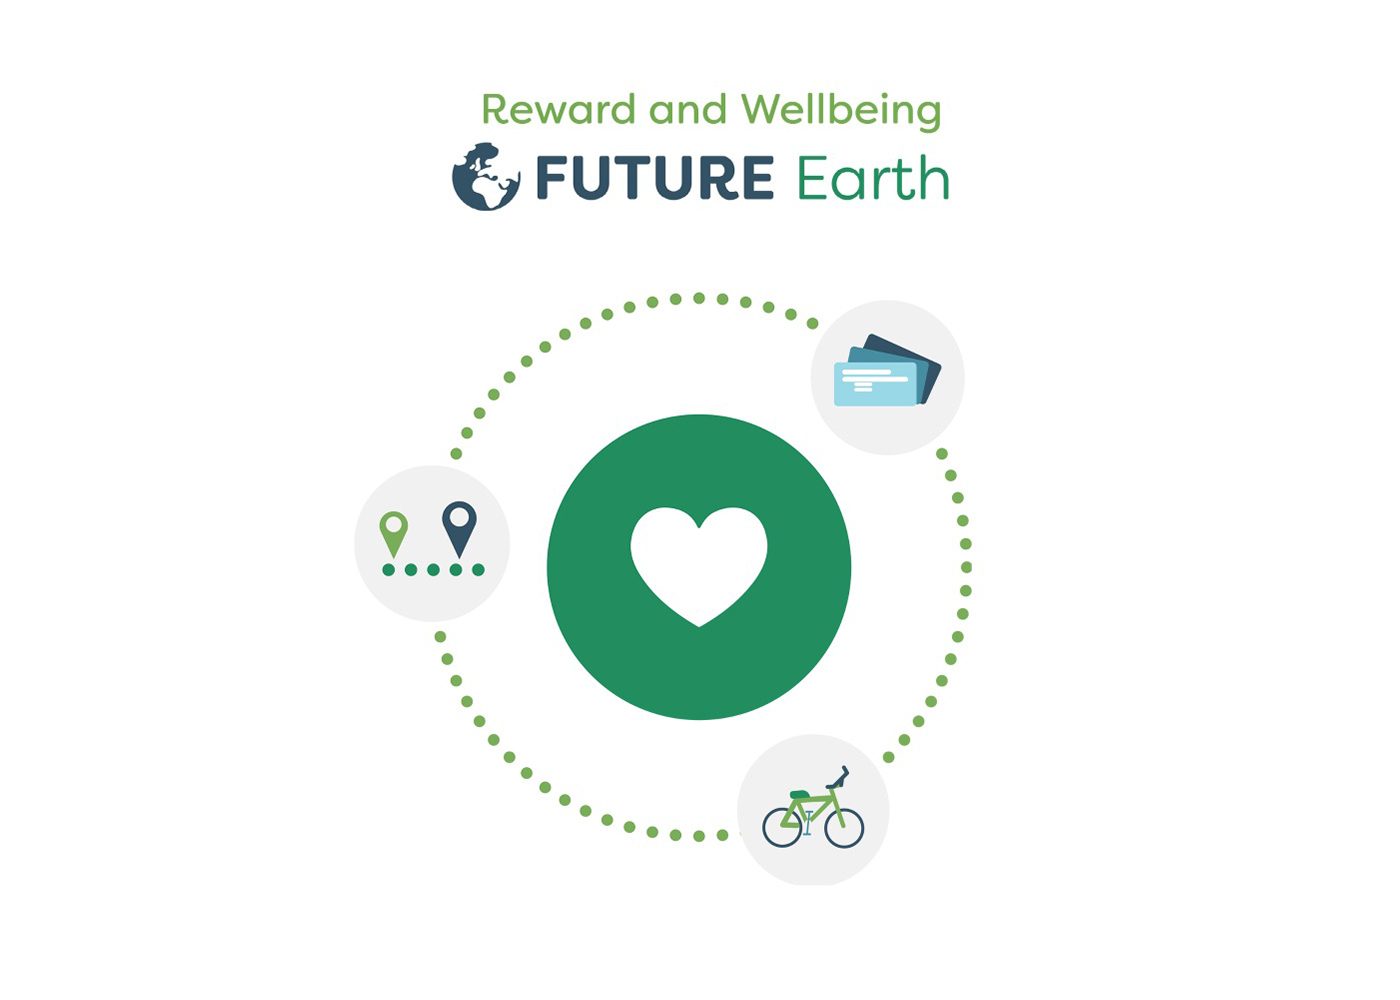 Future Earth - Reward and Wellbeing